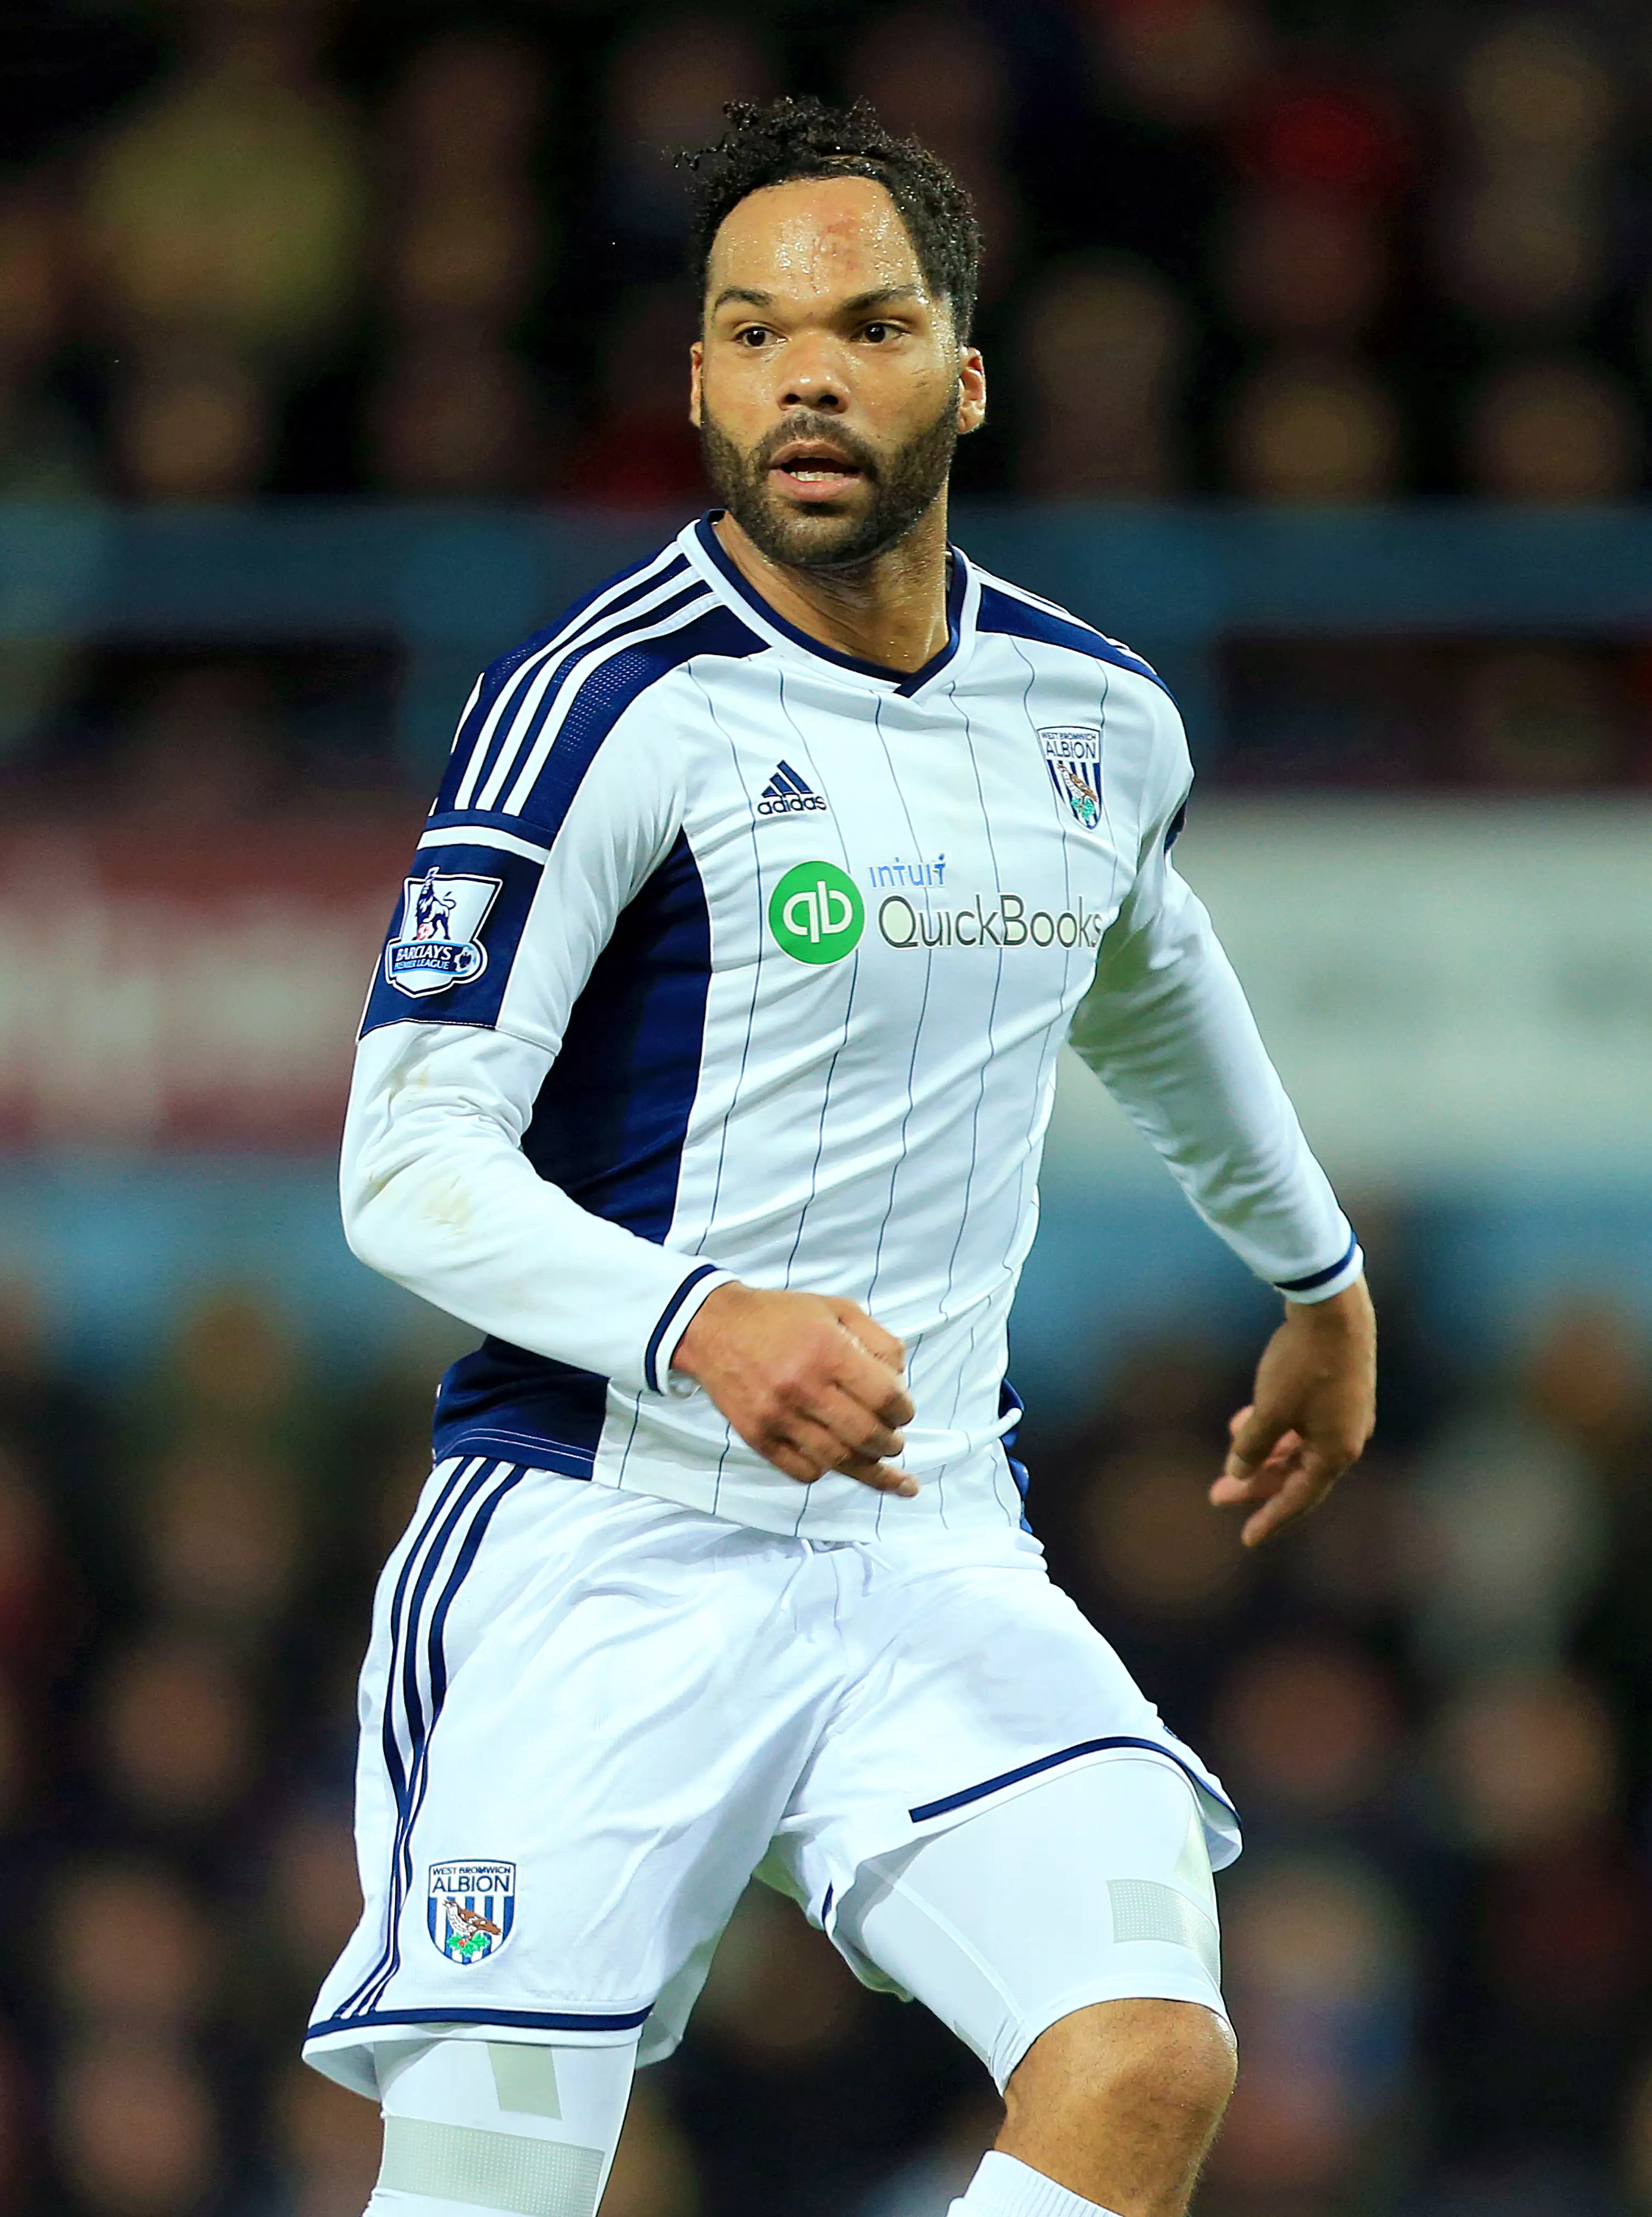 Joleon Lescott has a scar on his head from a car accident when he was a child.